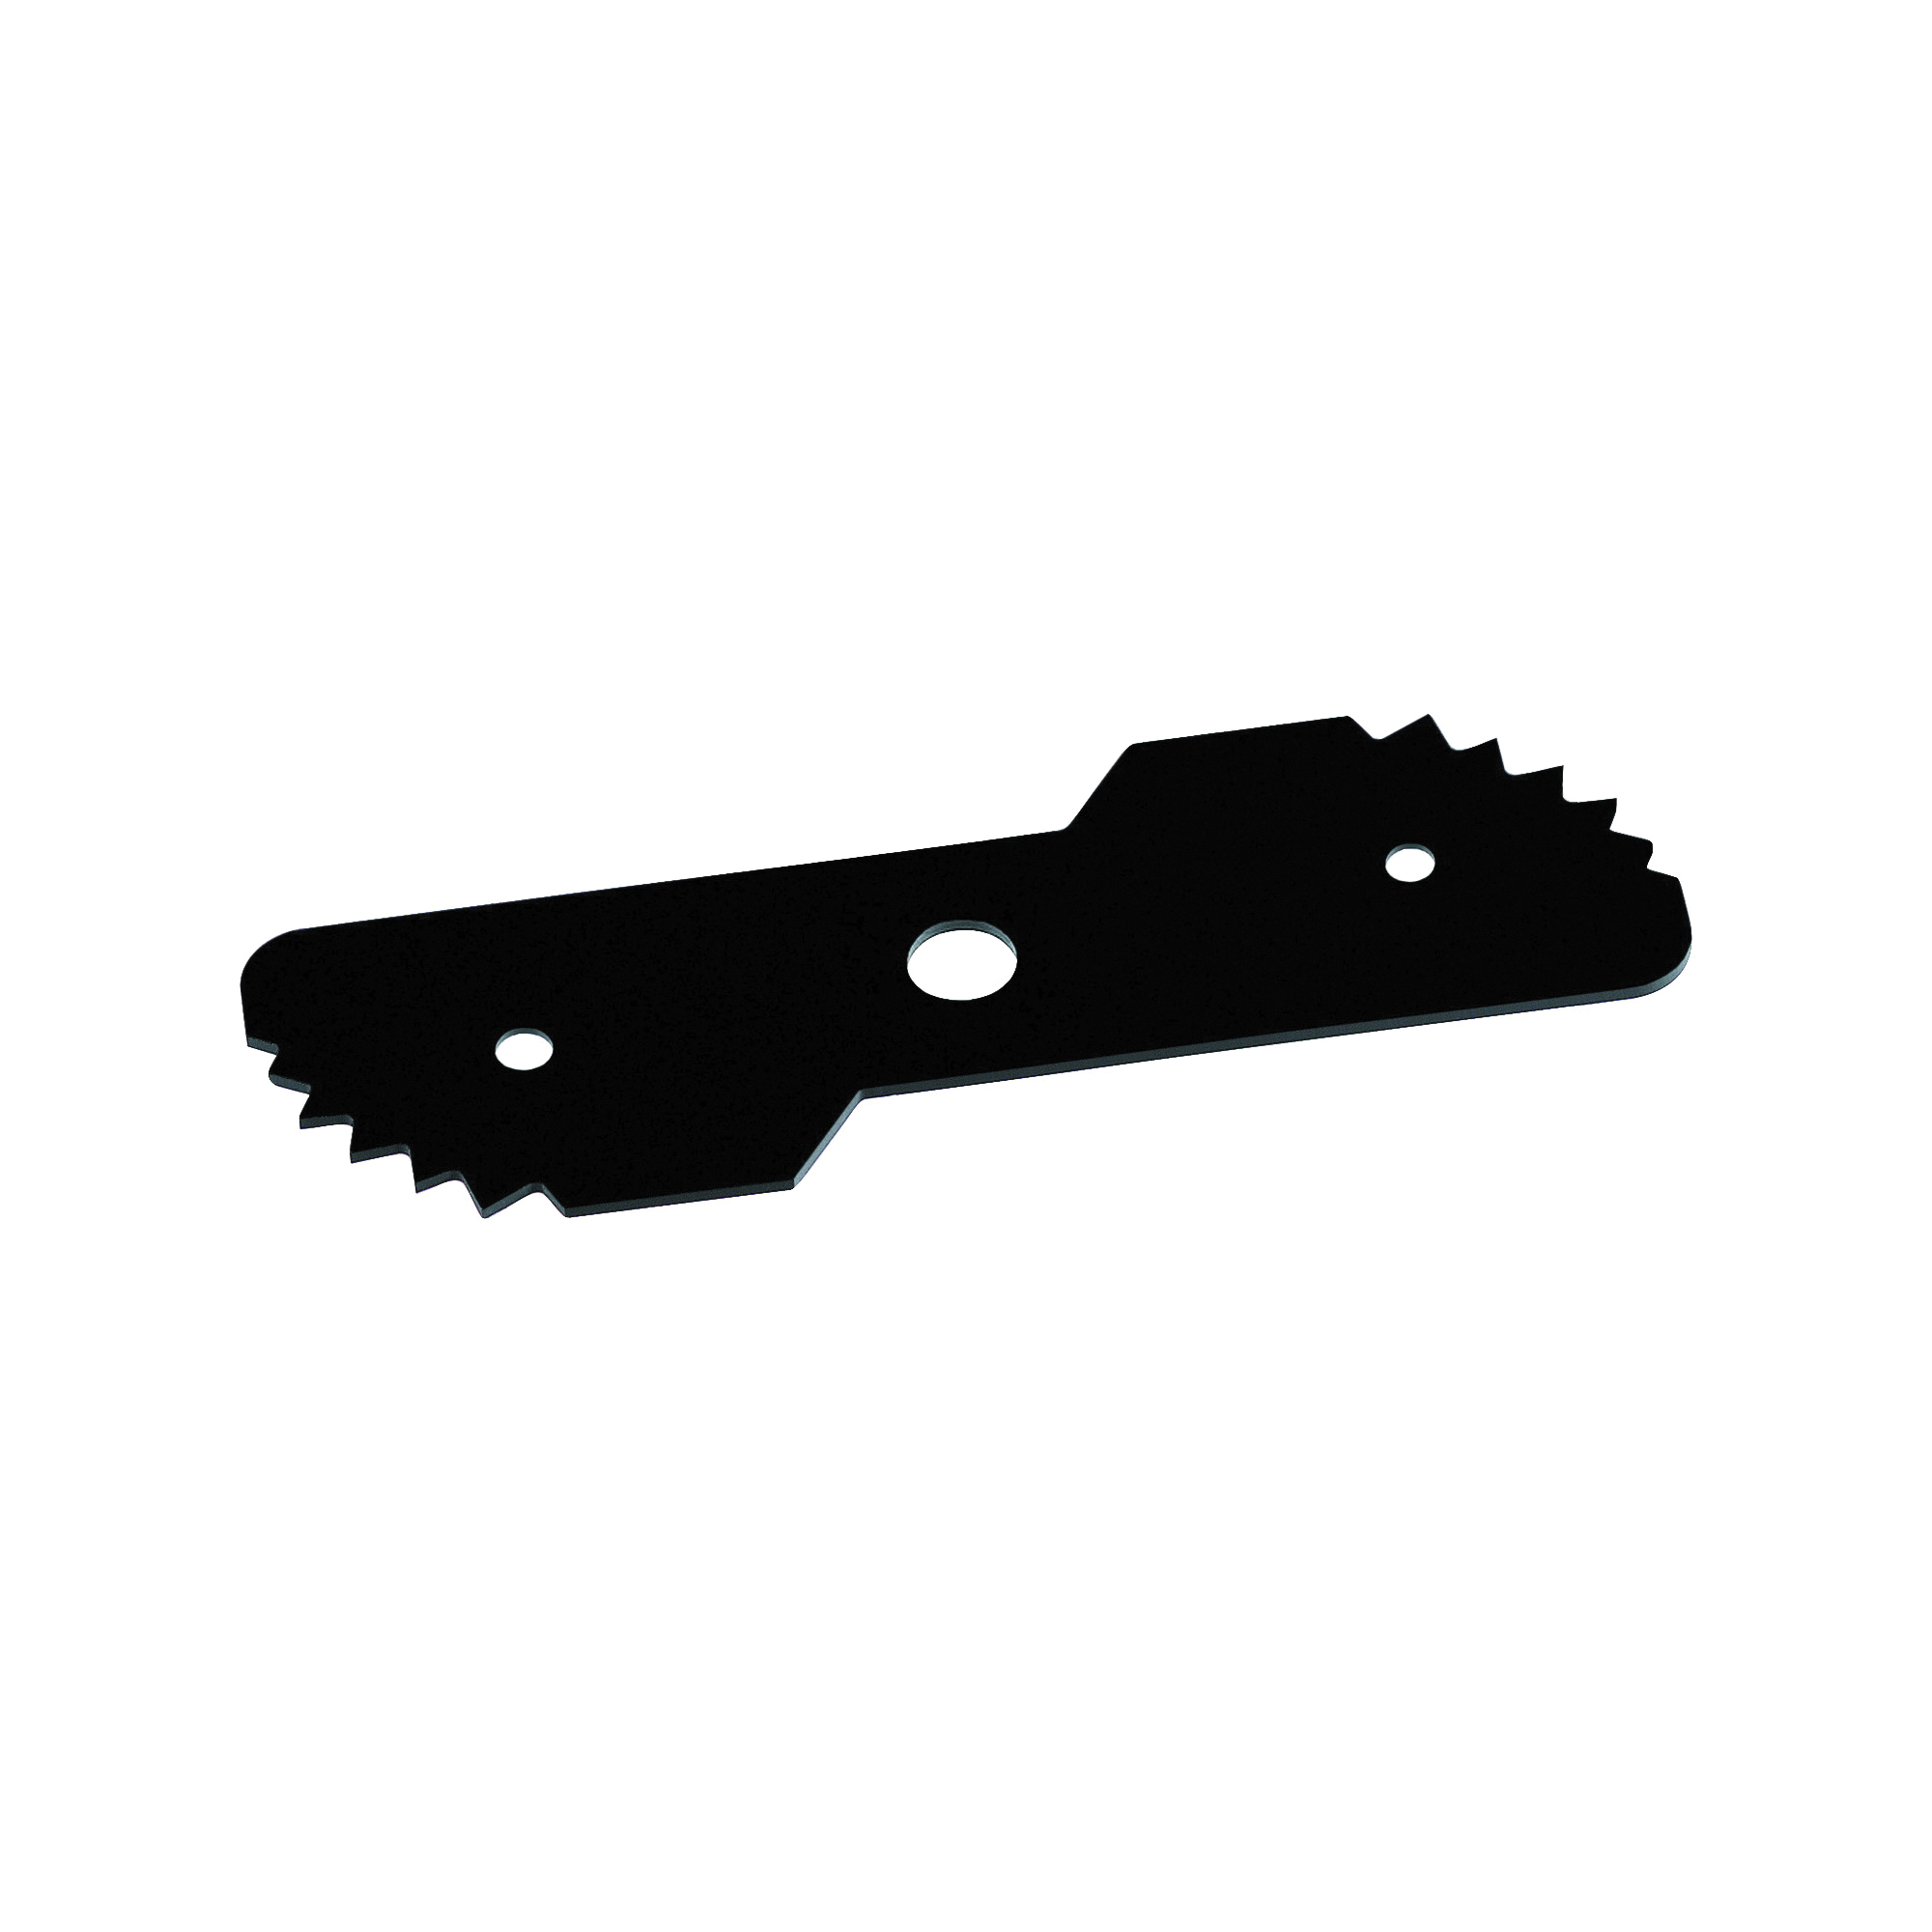 EB-007AL Replacement Blade, Hardened Steel, For: LE750 2-in-1 Landscape Edger